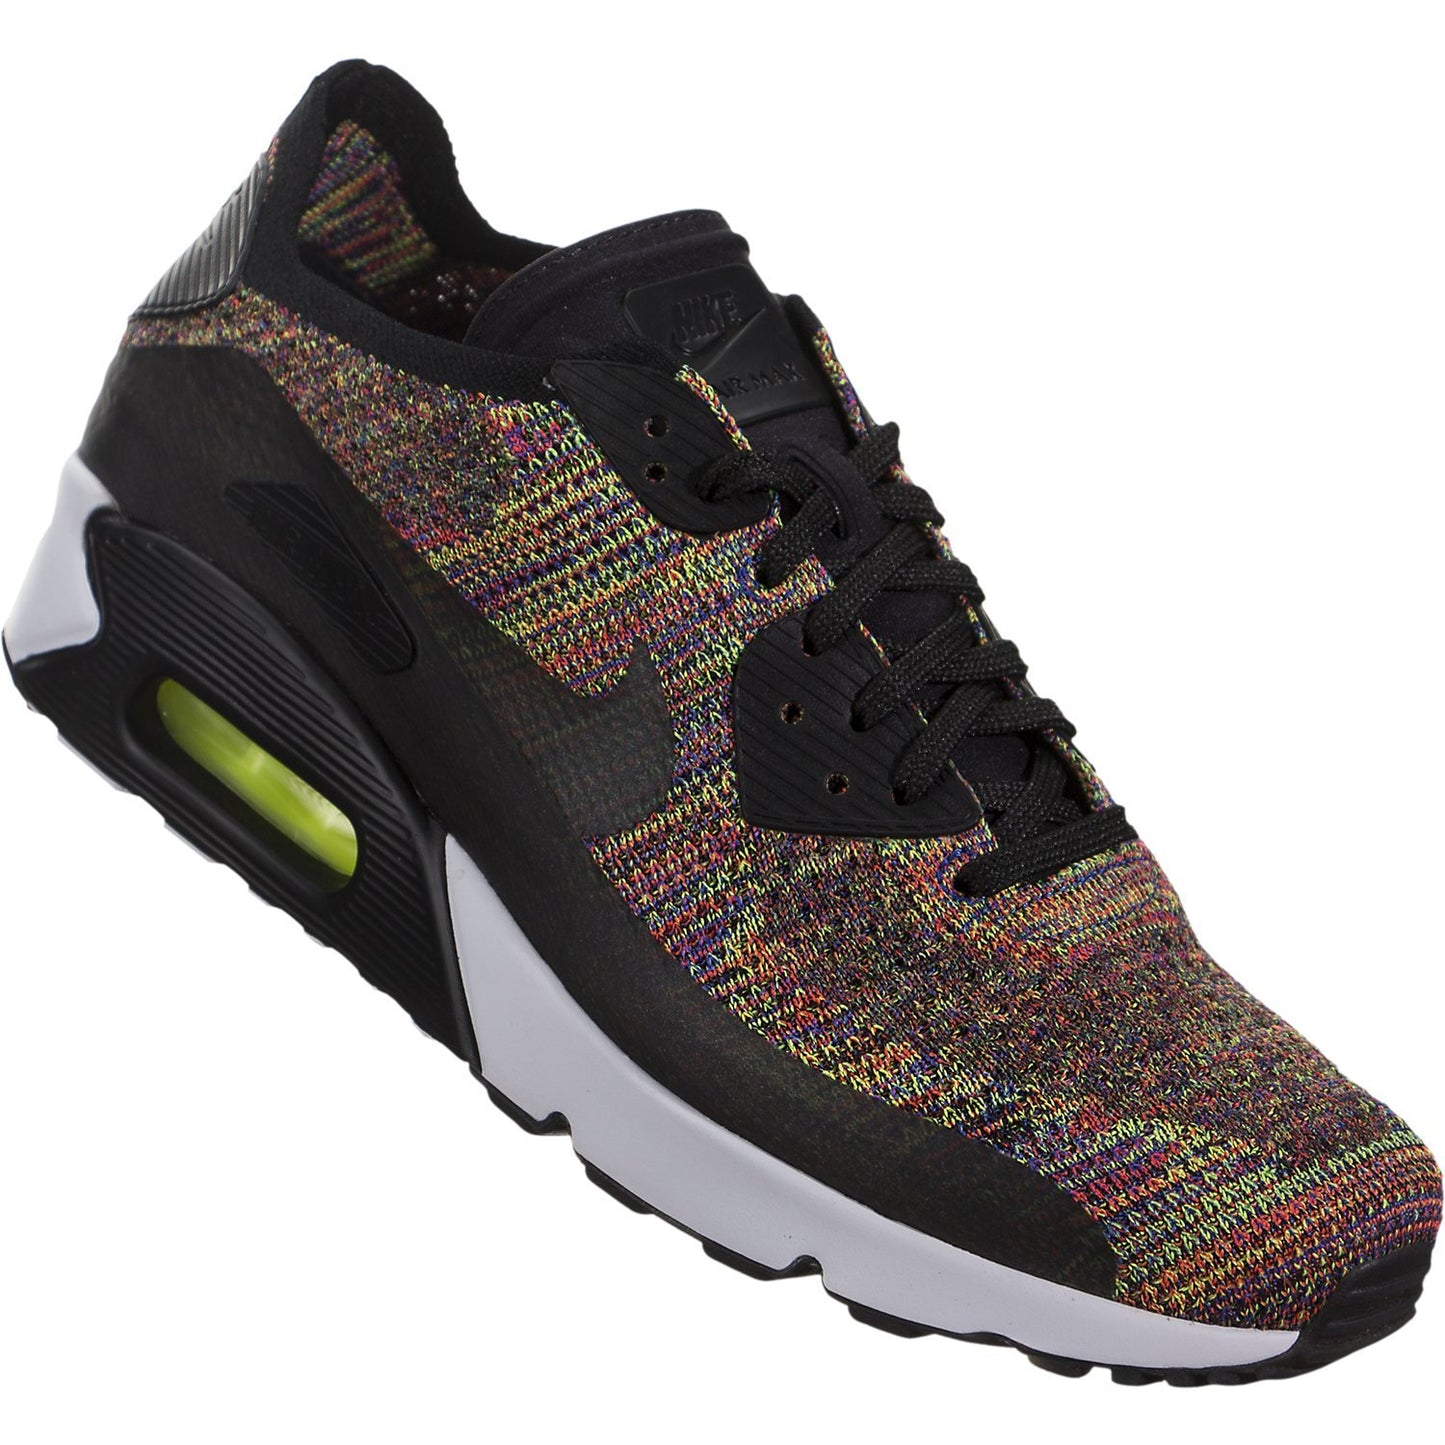 Nike Air Max 90 Ultra 2.0 Flyknit Multi-Color 875943-002